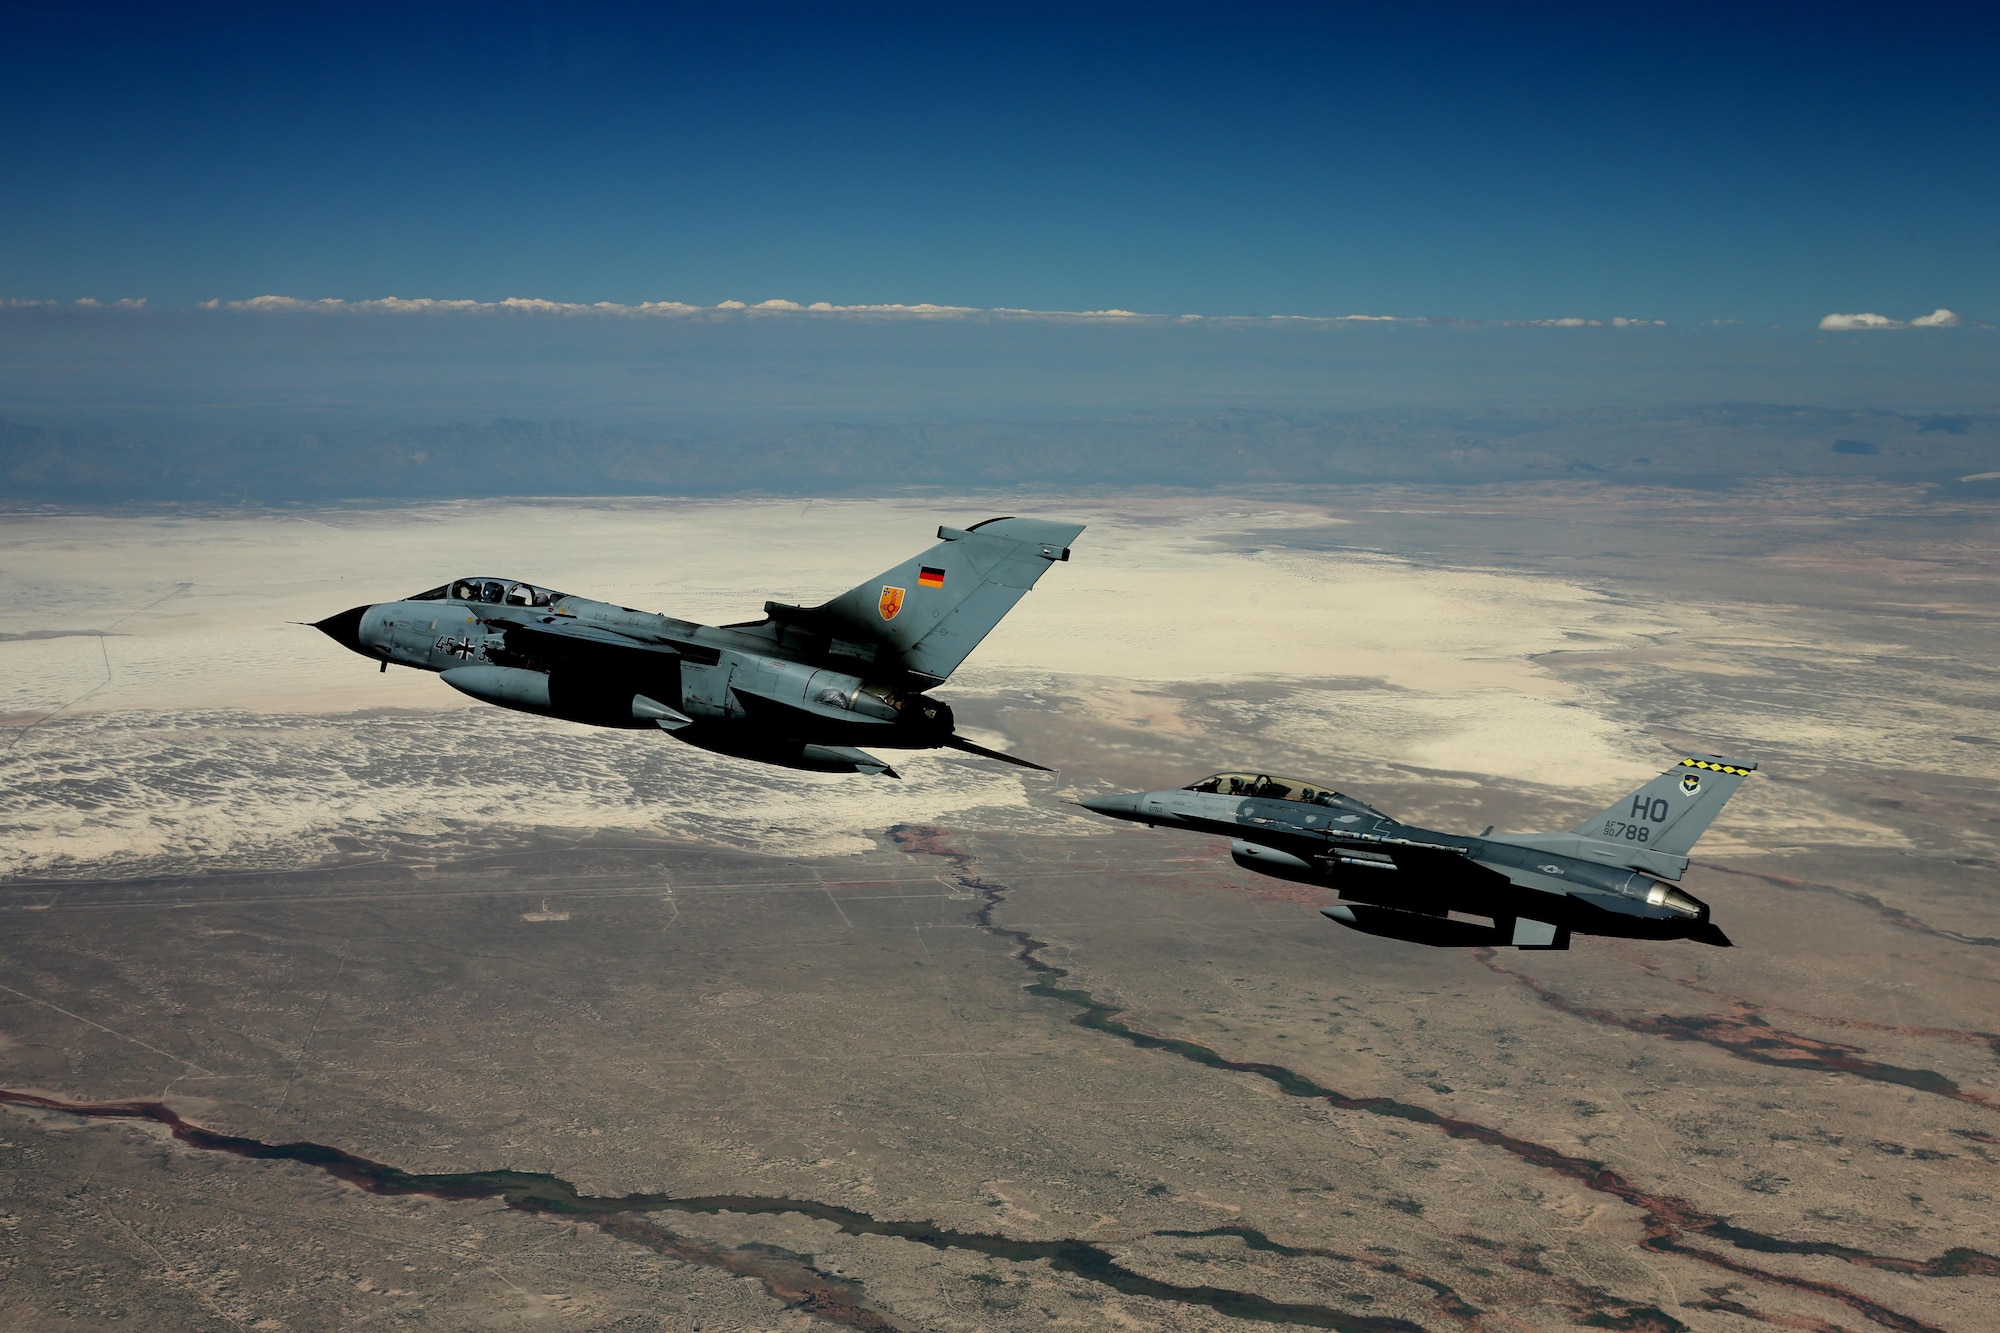 A German air force Tornado and an F-16 Fighting Falcon assigned to the 314th Fighter Squadron fly in formation together during the last joint flying mission at Holloman Air Force Base, Aug. 17, 2017. The GAF has entered its final stage of departure, however they will not complete their departure from Holloman AFB until mid 2019. (U.S. Air Force photo by Maj. Bradford "Emcon" Brizek)